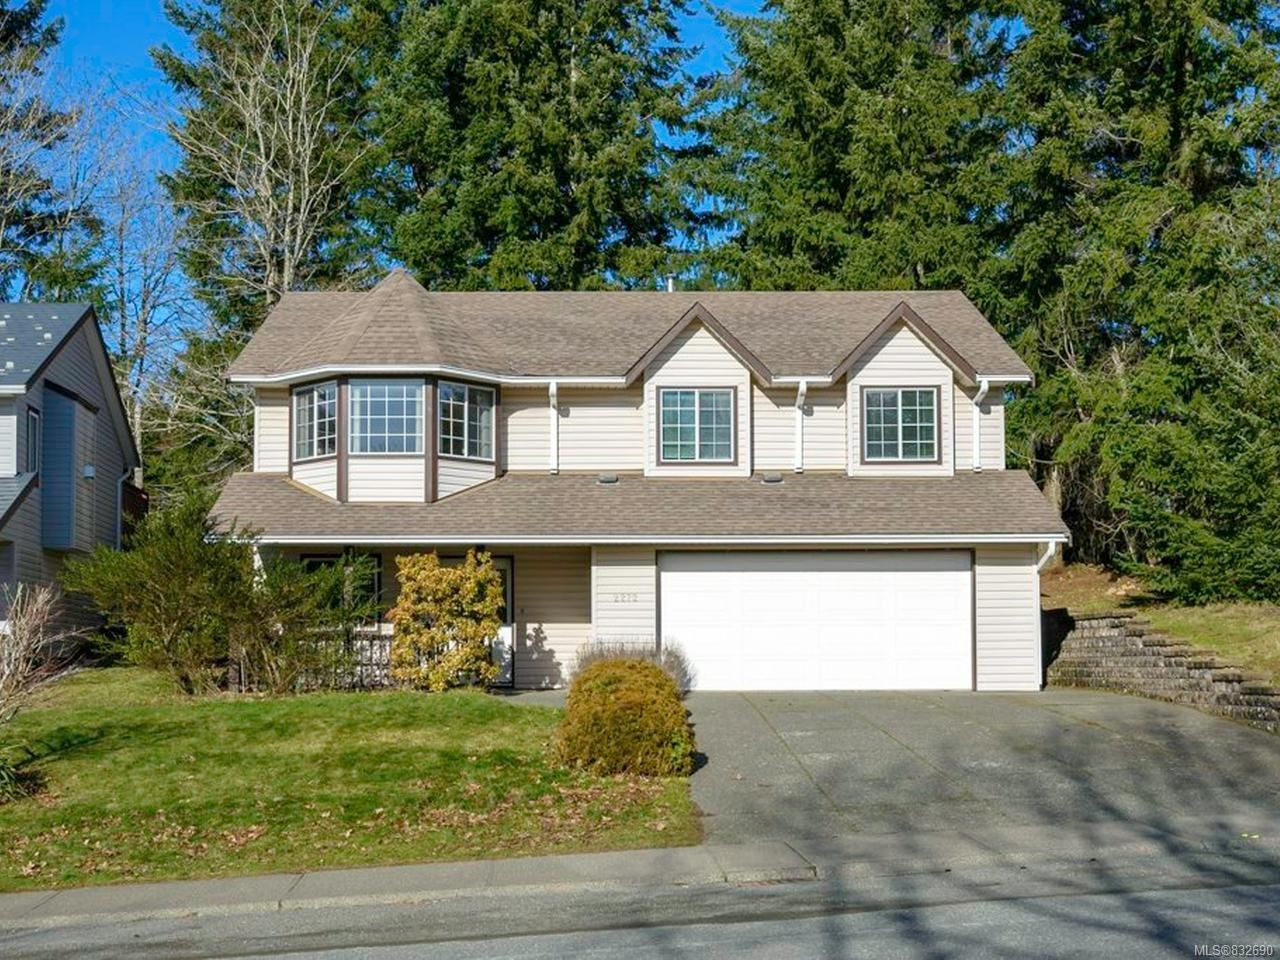 Main Photo: 2272 VALLEY VIEW DRIVE in COURTENAY: CV Courtenay East House for sale (Comox Valley)  : MLS®# 832690